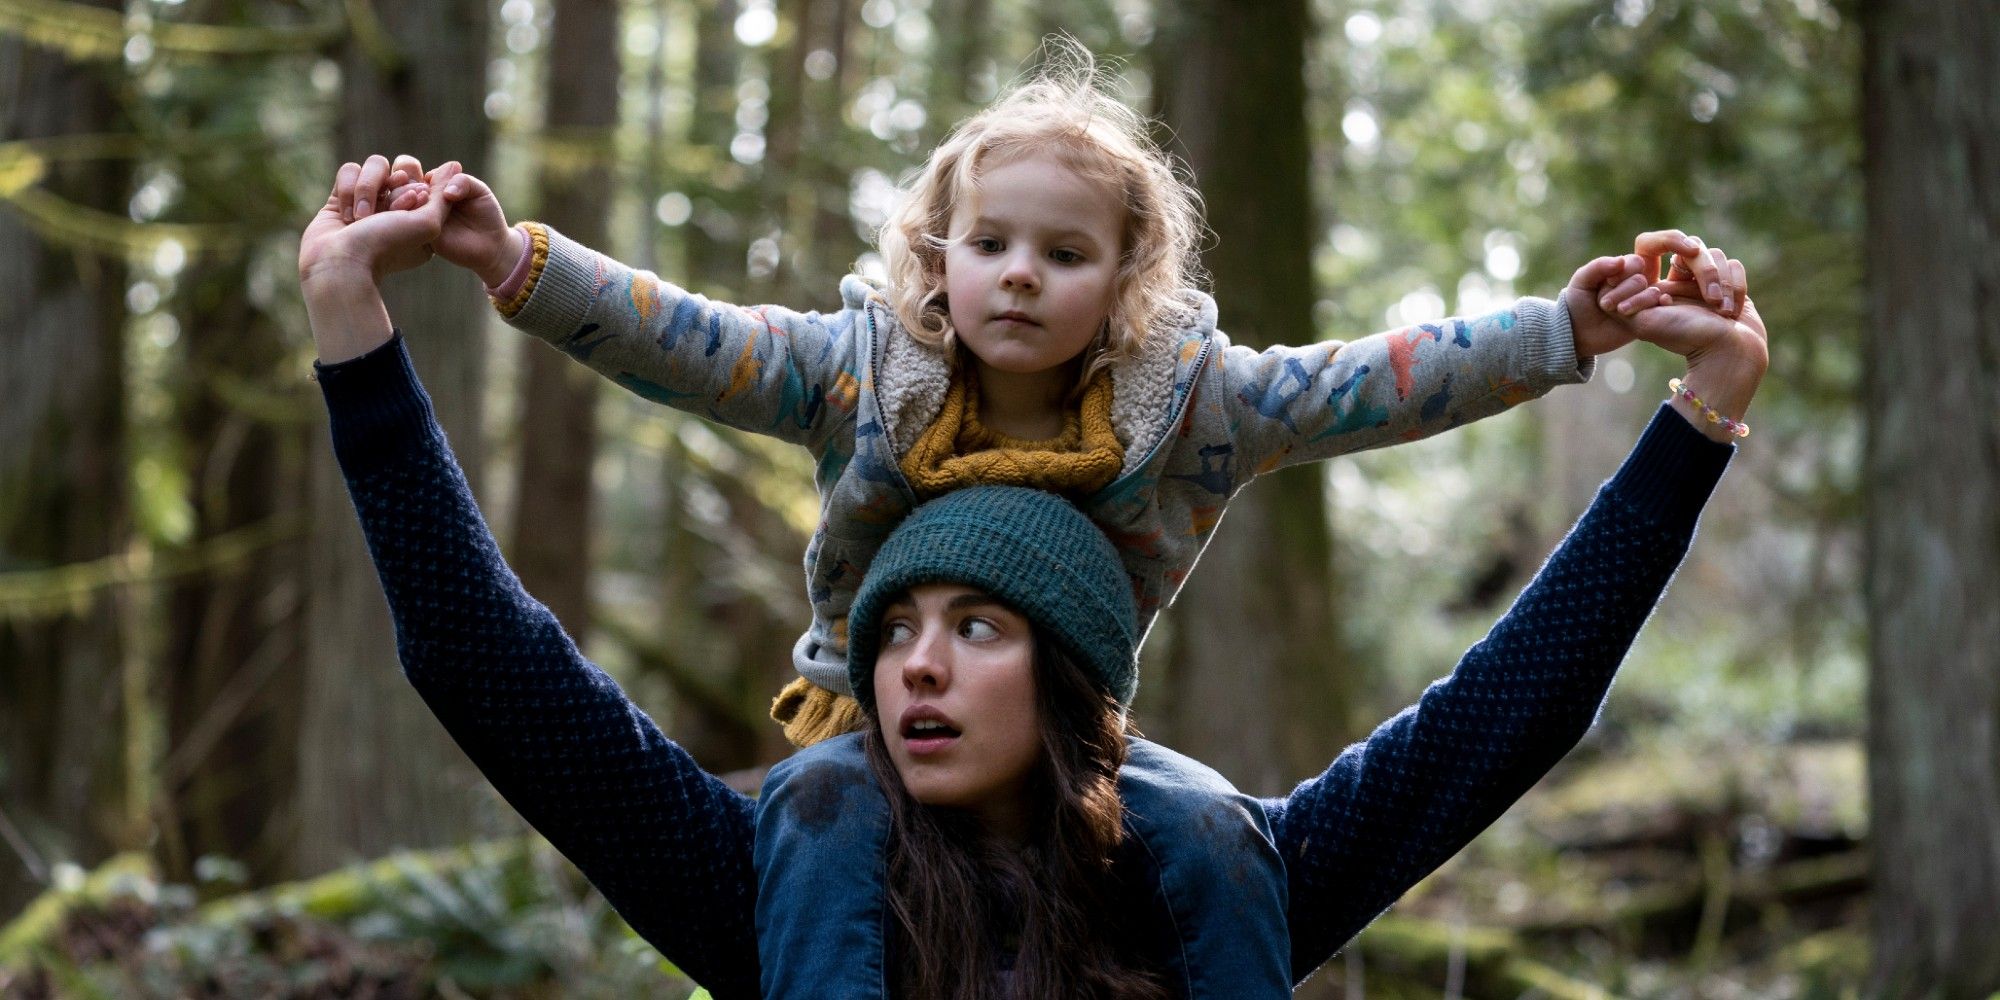 Margaret Qualley as Alex and Rylea Nevaeh Whittet as her daughter Maddy in Maid